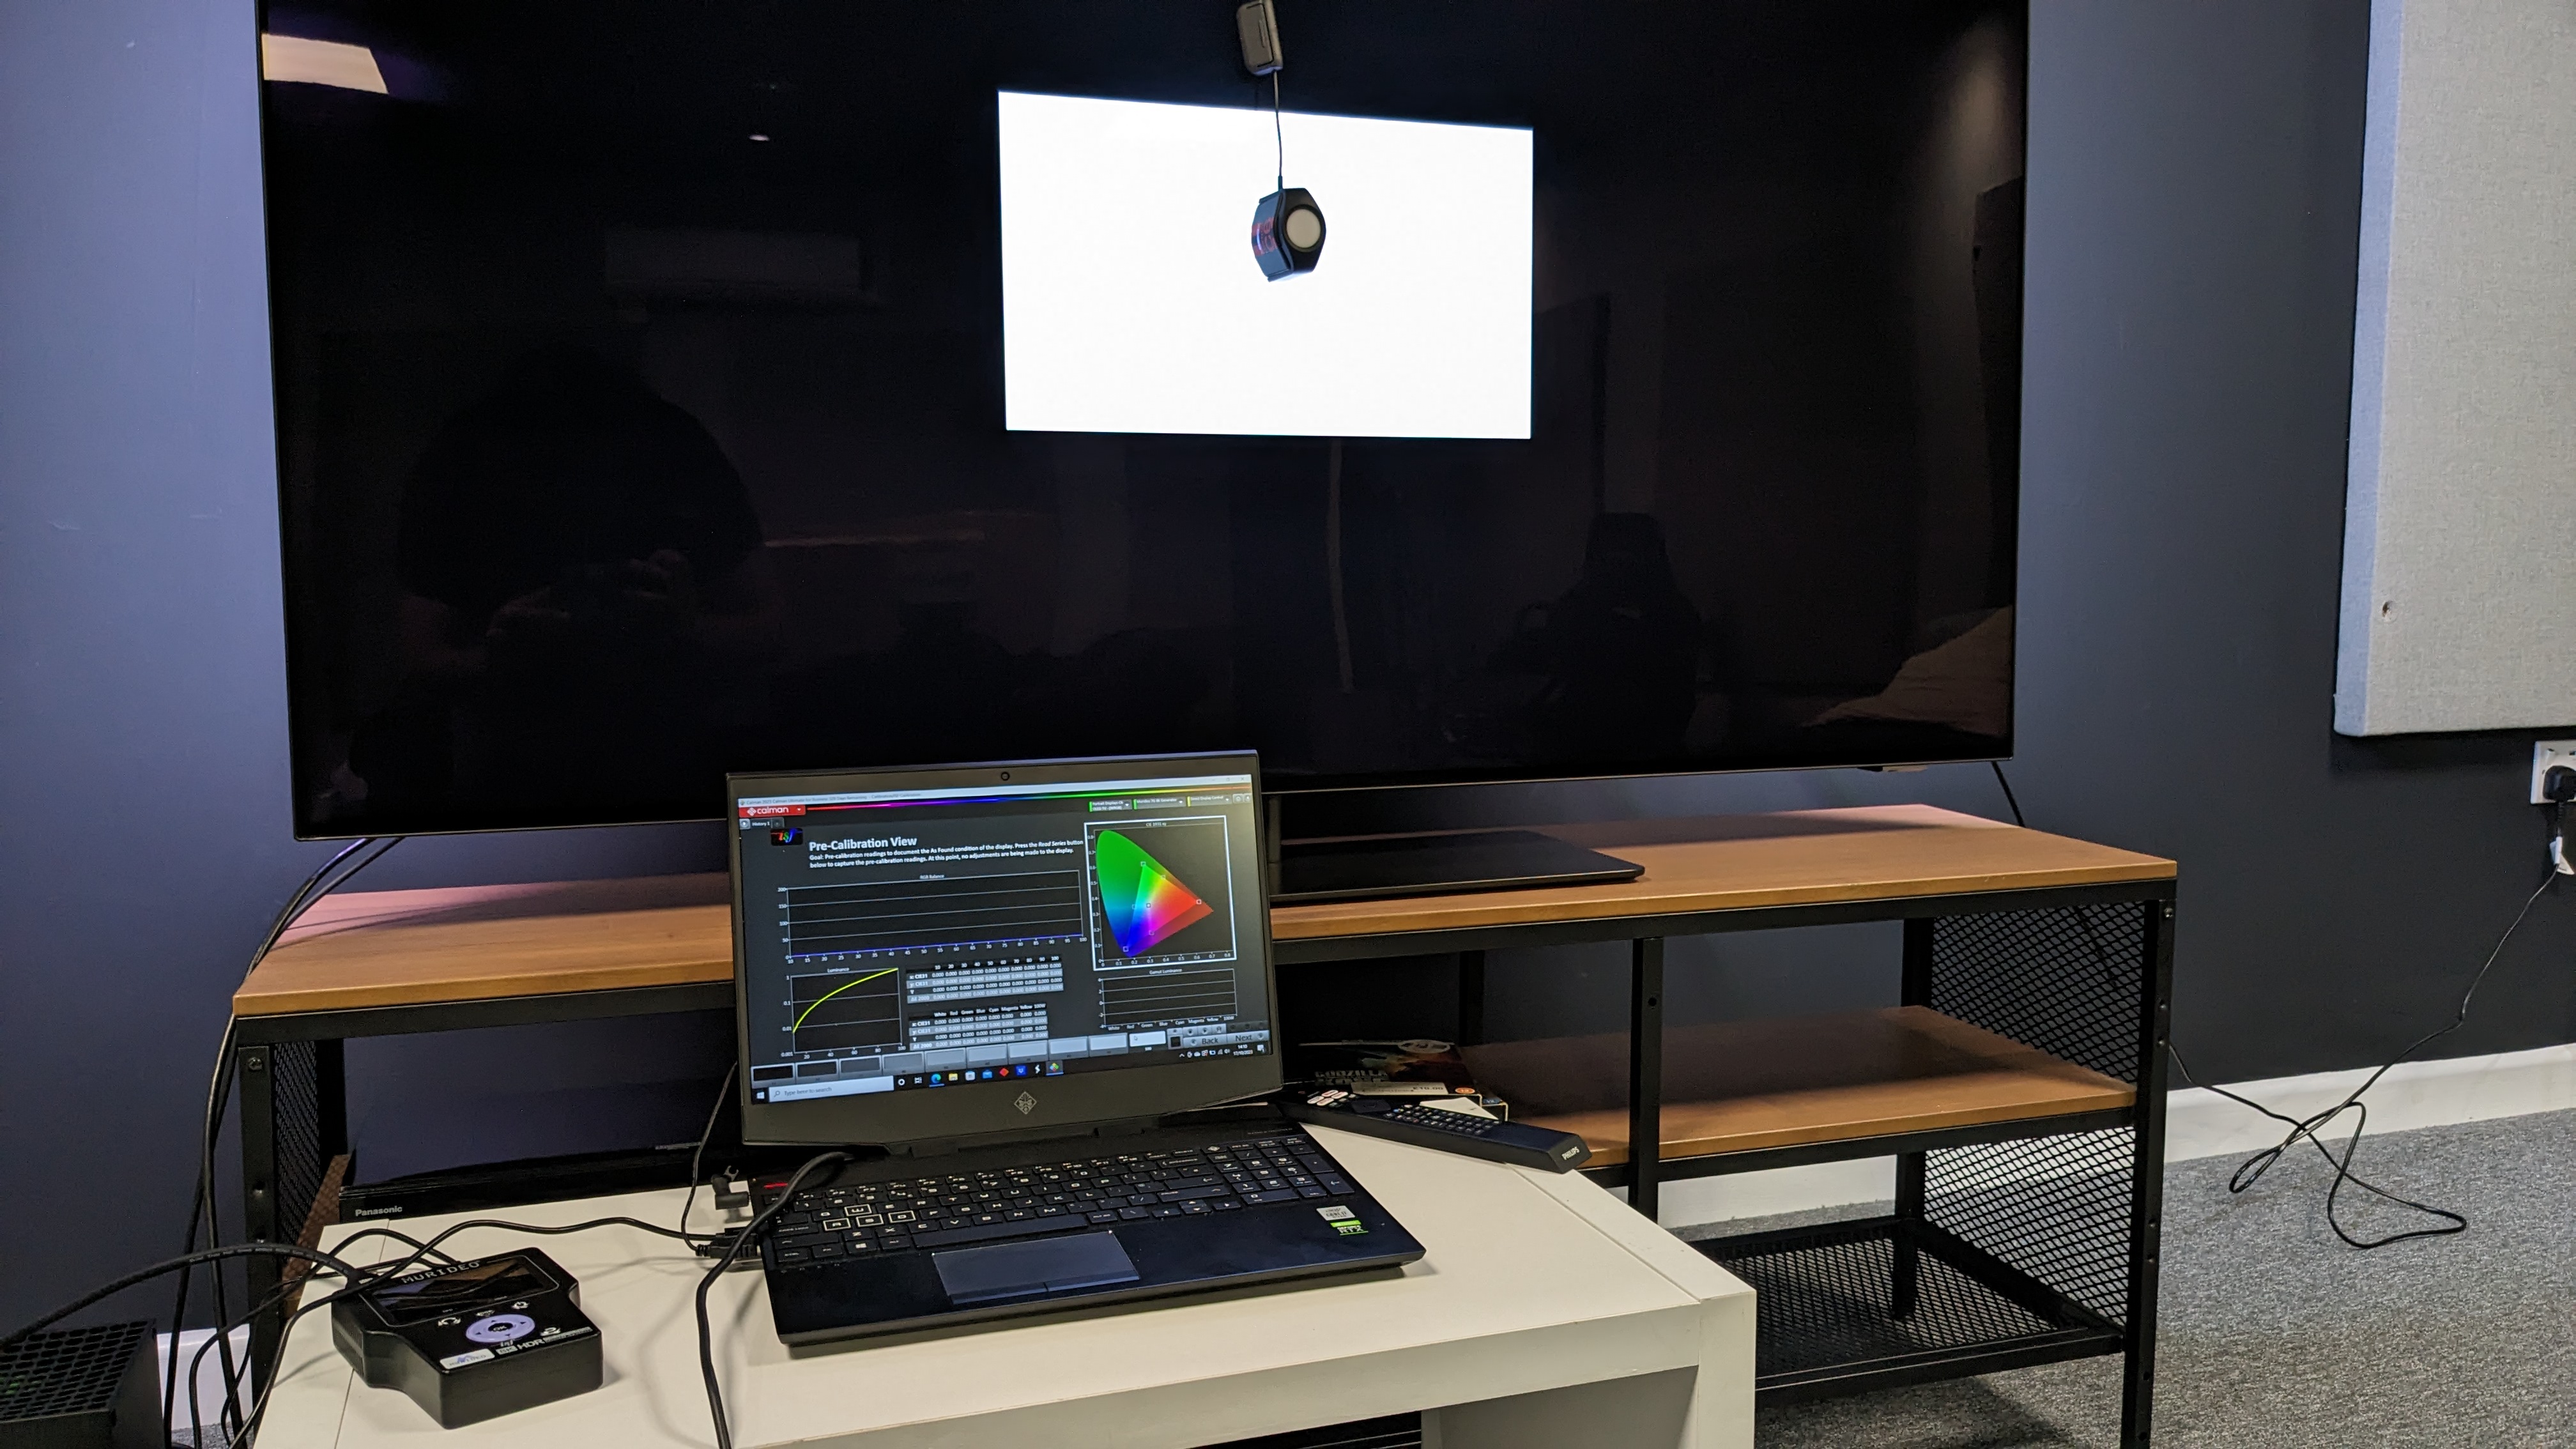 Philips OLED808 with testing equipment from Portrait displays Calman, Murideo and HP Omen laptop connected